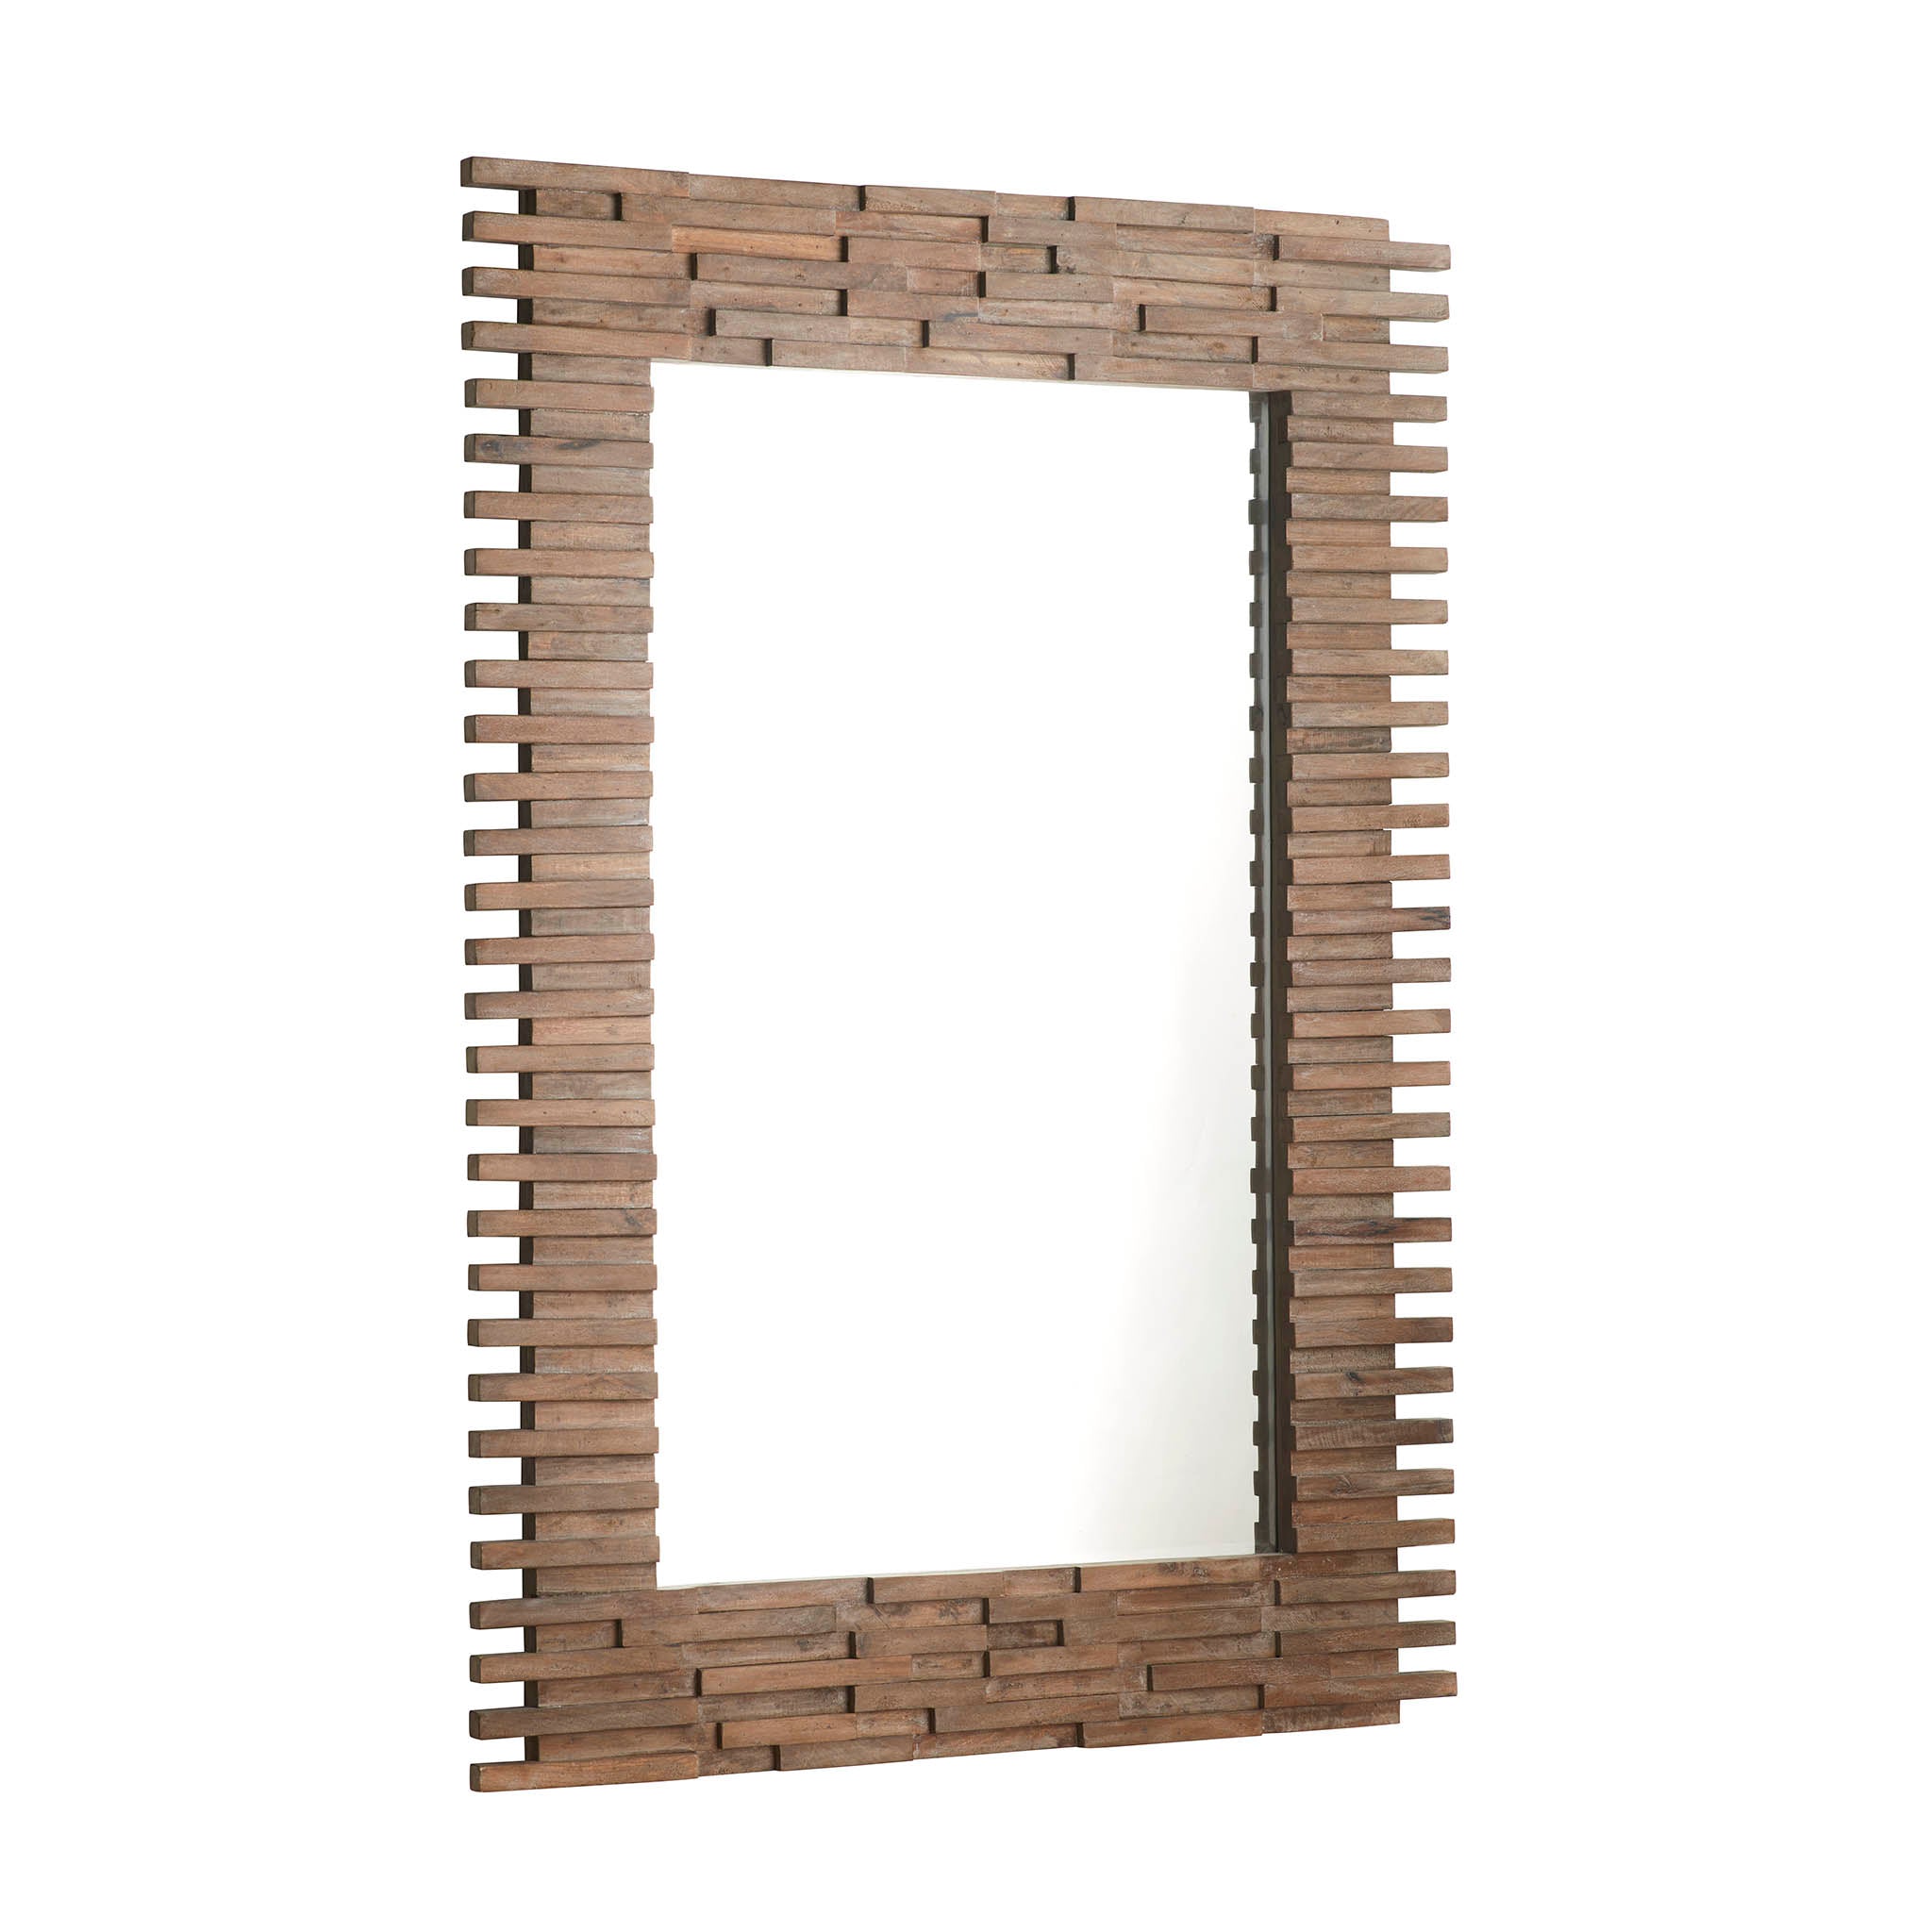 Extra-Large Slatted Solid Wood Mirror